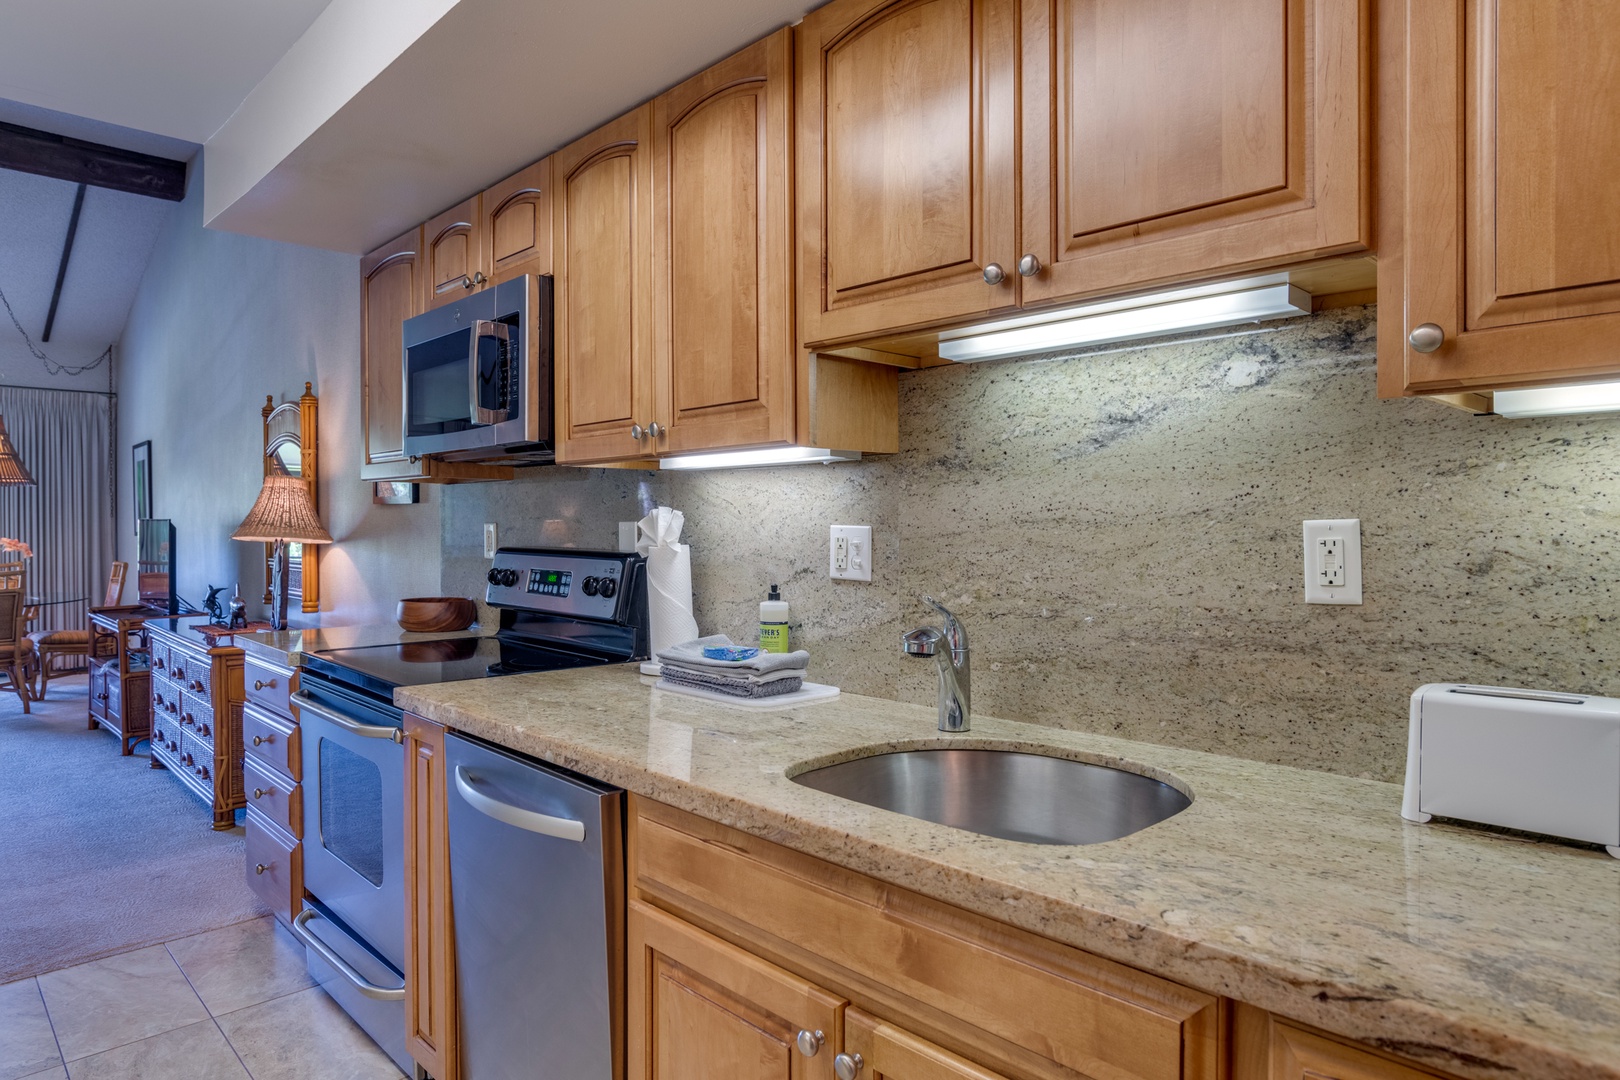 Lahaina Vacation Rentals, Maui Kaanapali Villas B225 - Complete Kitchen with all amenities